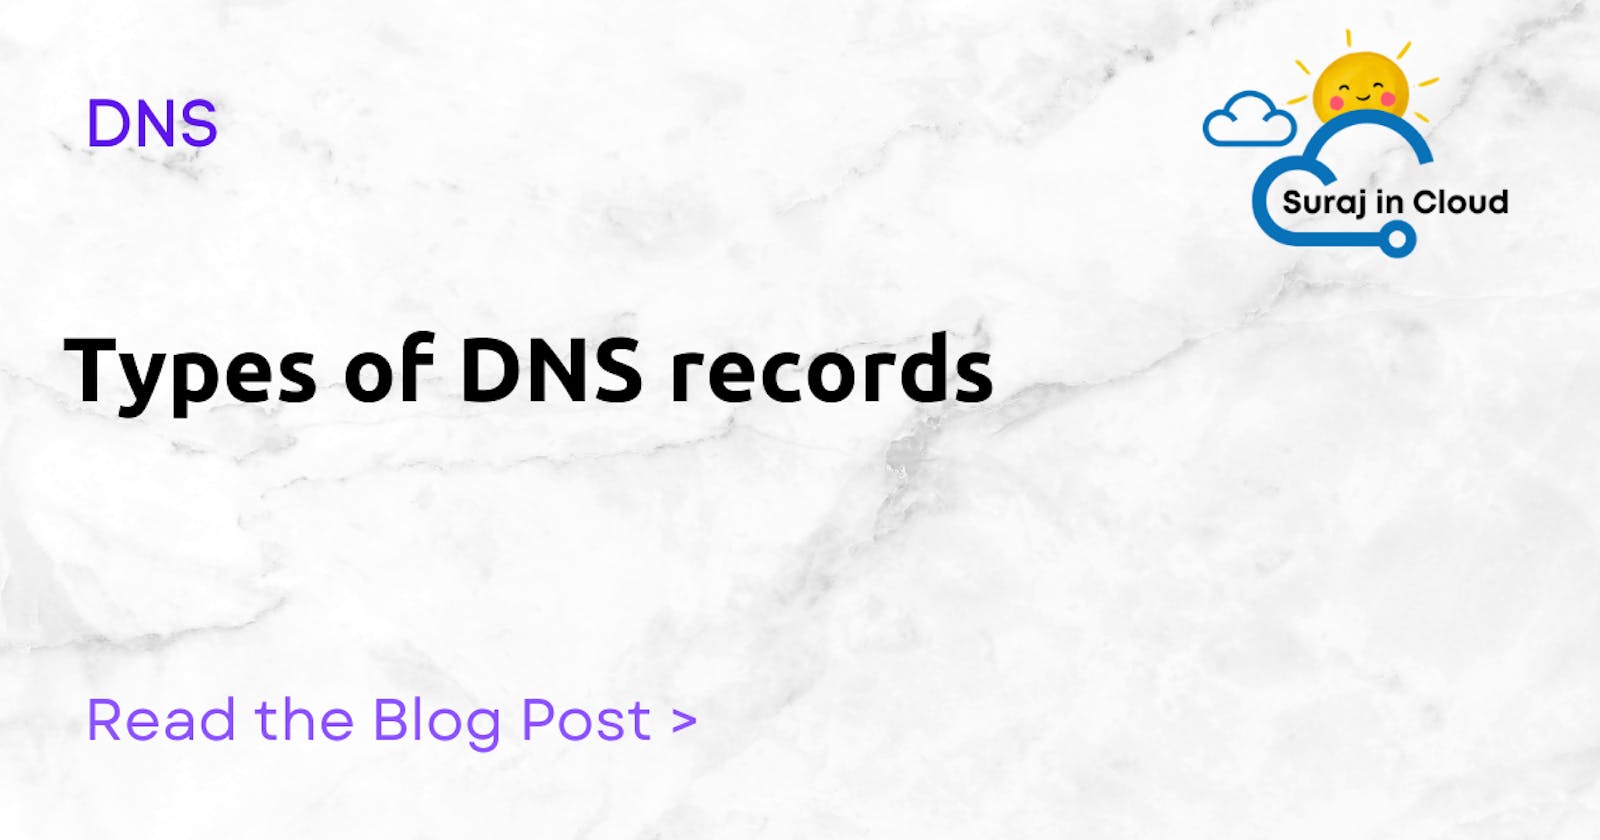 Types of DNS records